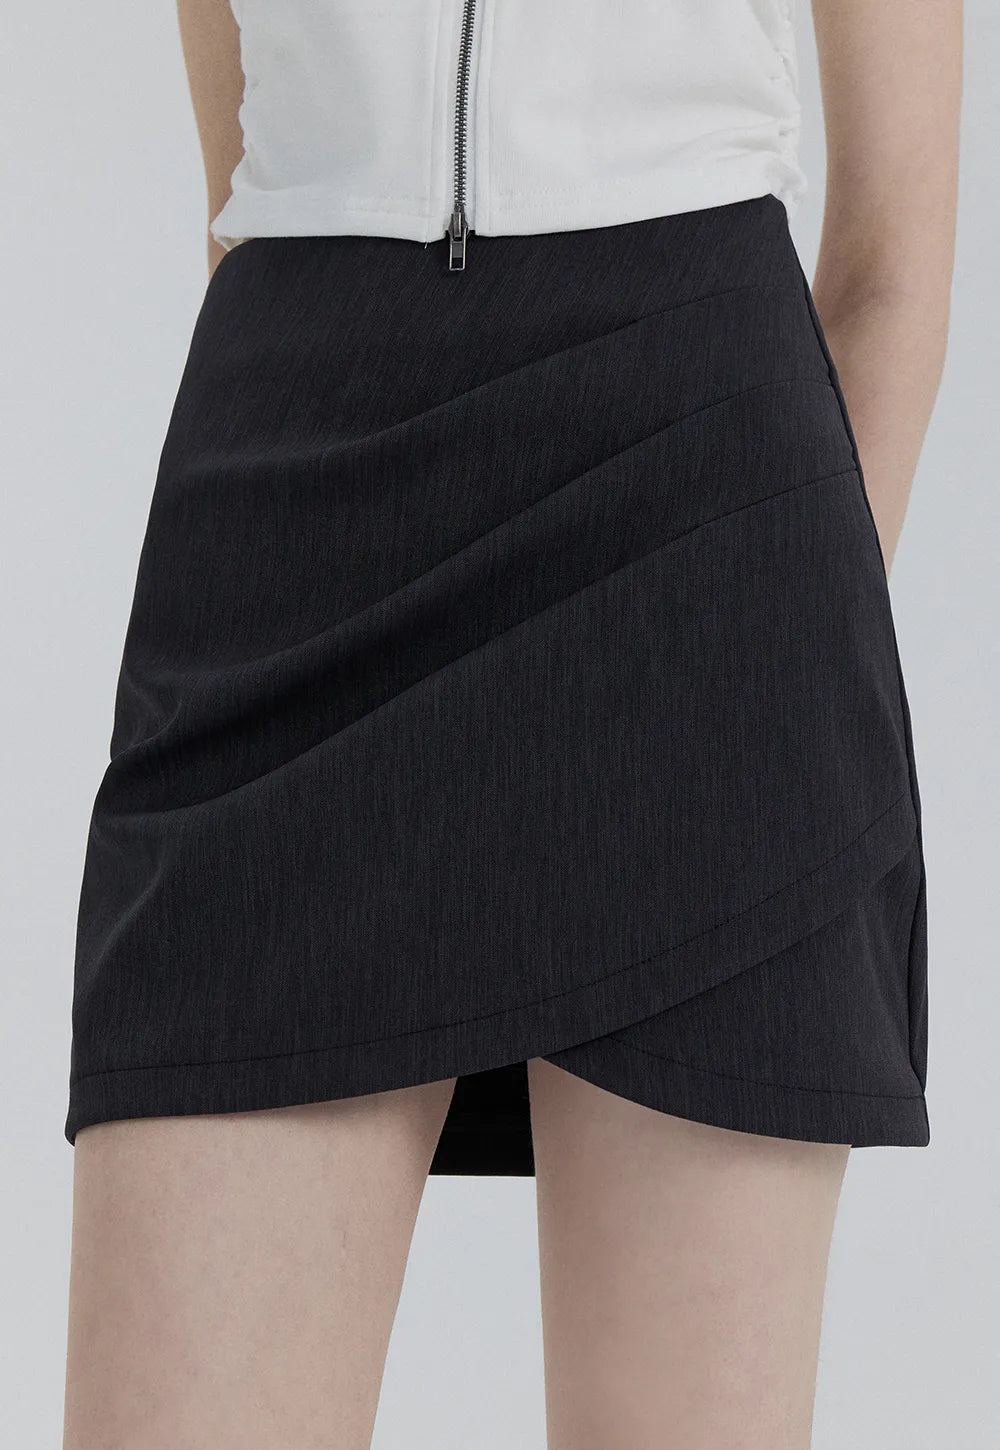 Modern Asymmetric Wrap Mini Skirt – Effortless Style for Every Occasion